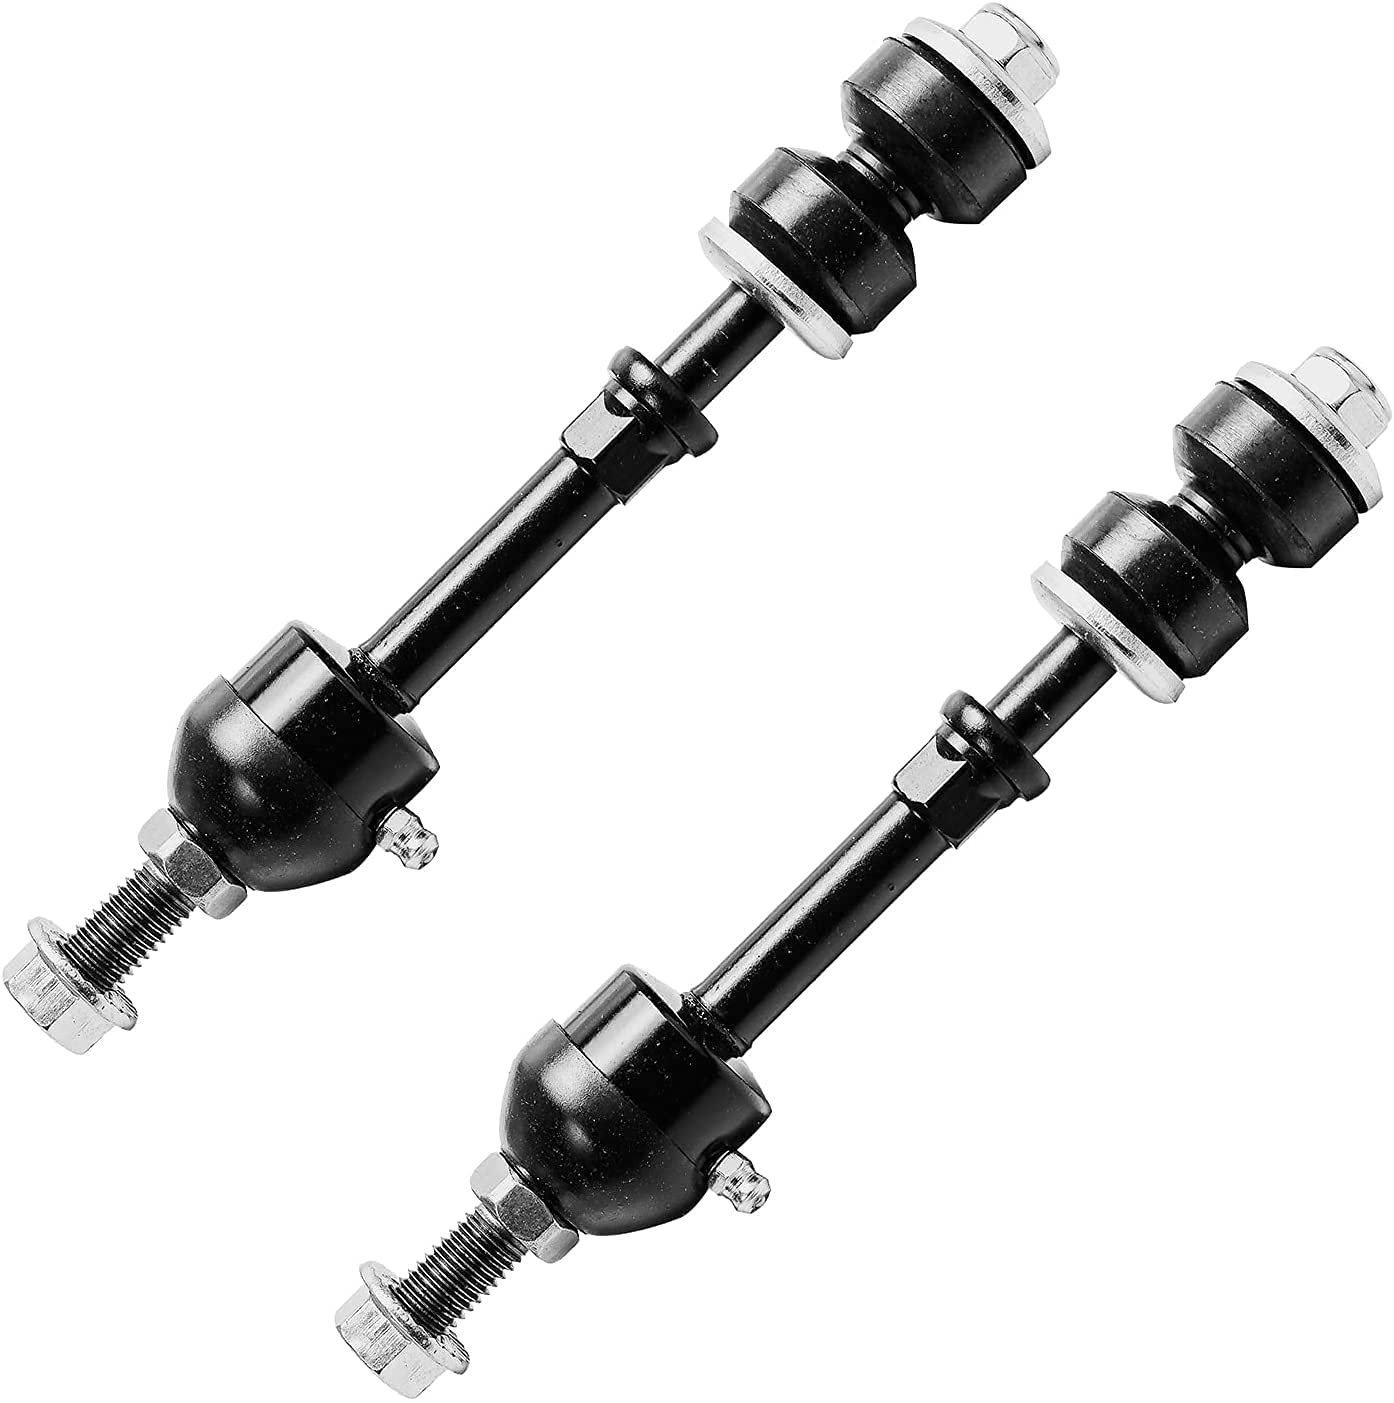 Detroit Axle - Front End 12pc Suspension Kit for 2WD 05-08 Ford F-150 Lincoln Mark LT [Base Payload] 4 Upper Lower Control Arms 2 Sway Bar Links 4 Tie Rods 2 Boots 2005 2006 2007 2008 Replacement